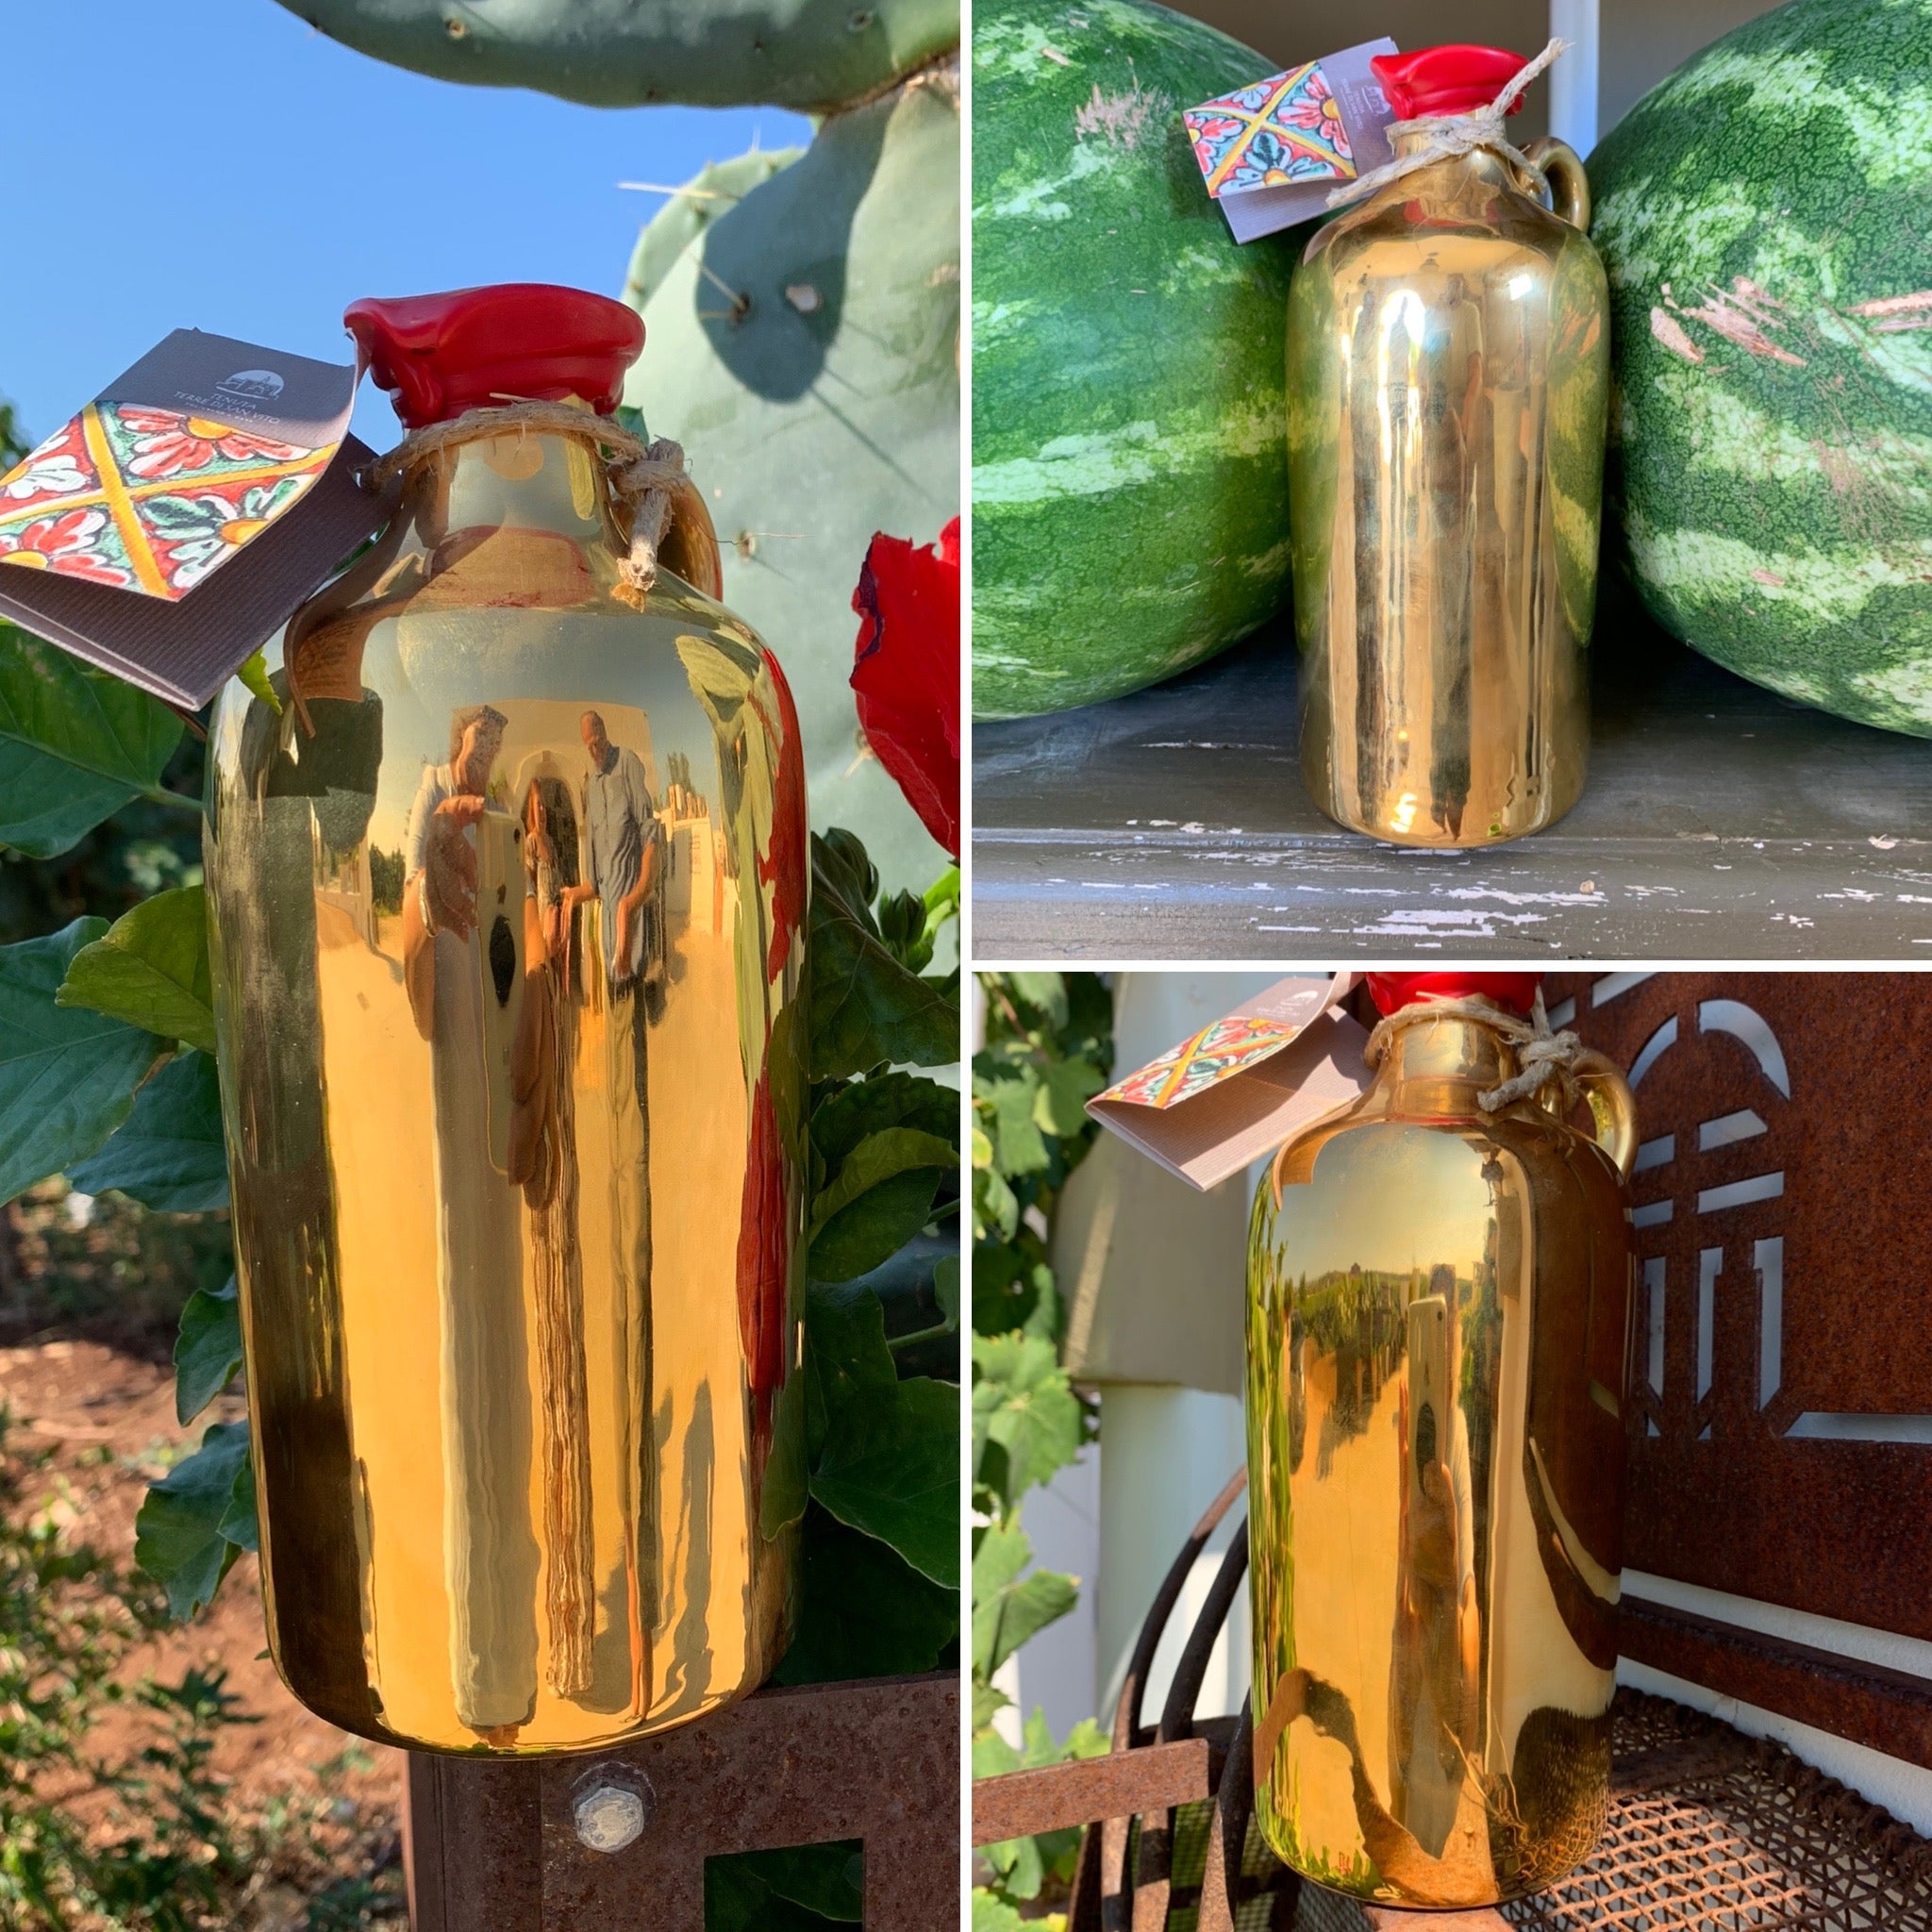 GOLD TERRACOTTA JAR EXCLUSIVE MADE TO ORDER – Containing our extra virgin olive oil